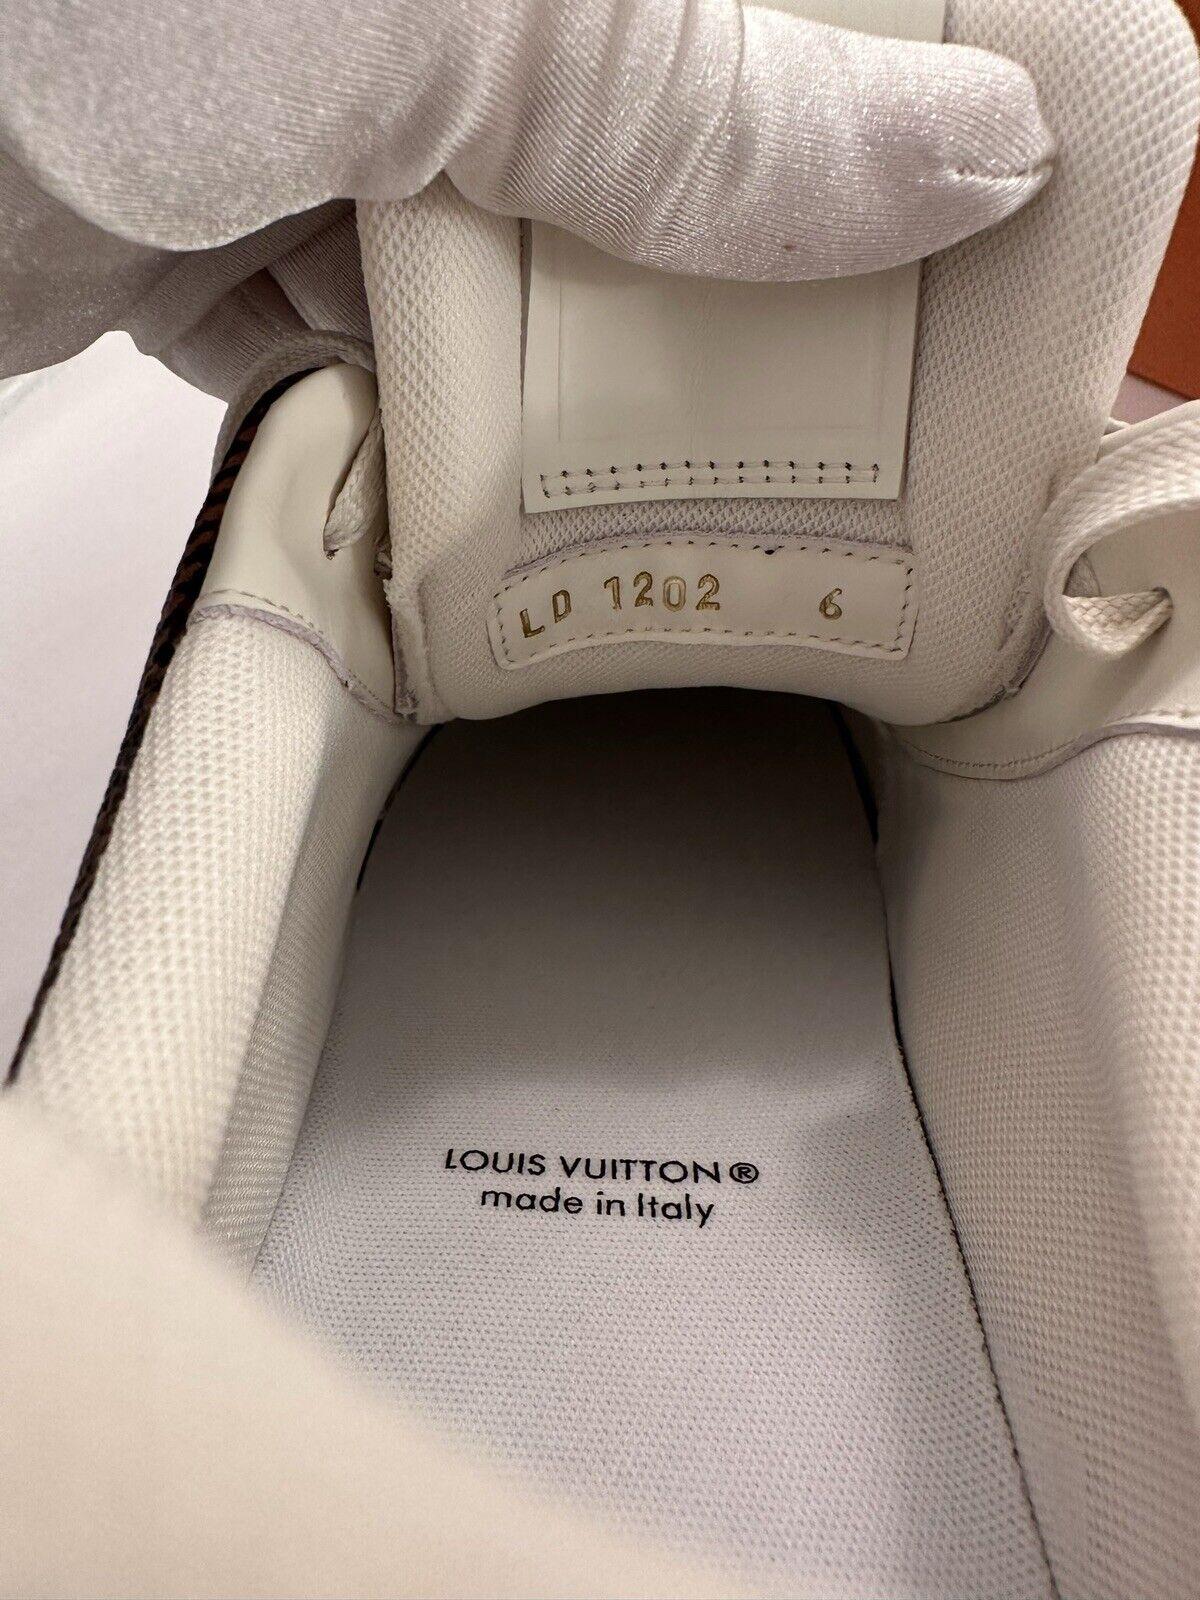 Women's or Men's Louis Vuitton Lv Trainer Damier Brand New Size 6 Sold Out! For Sale